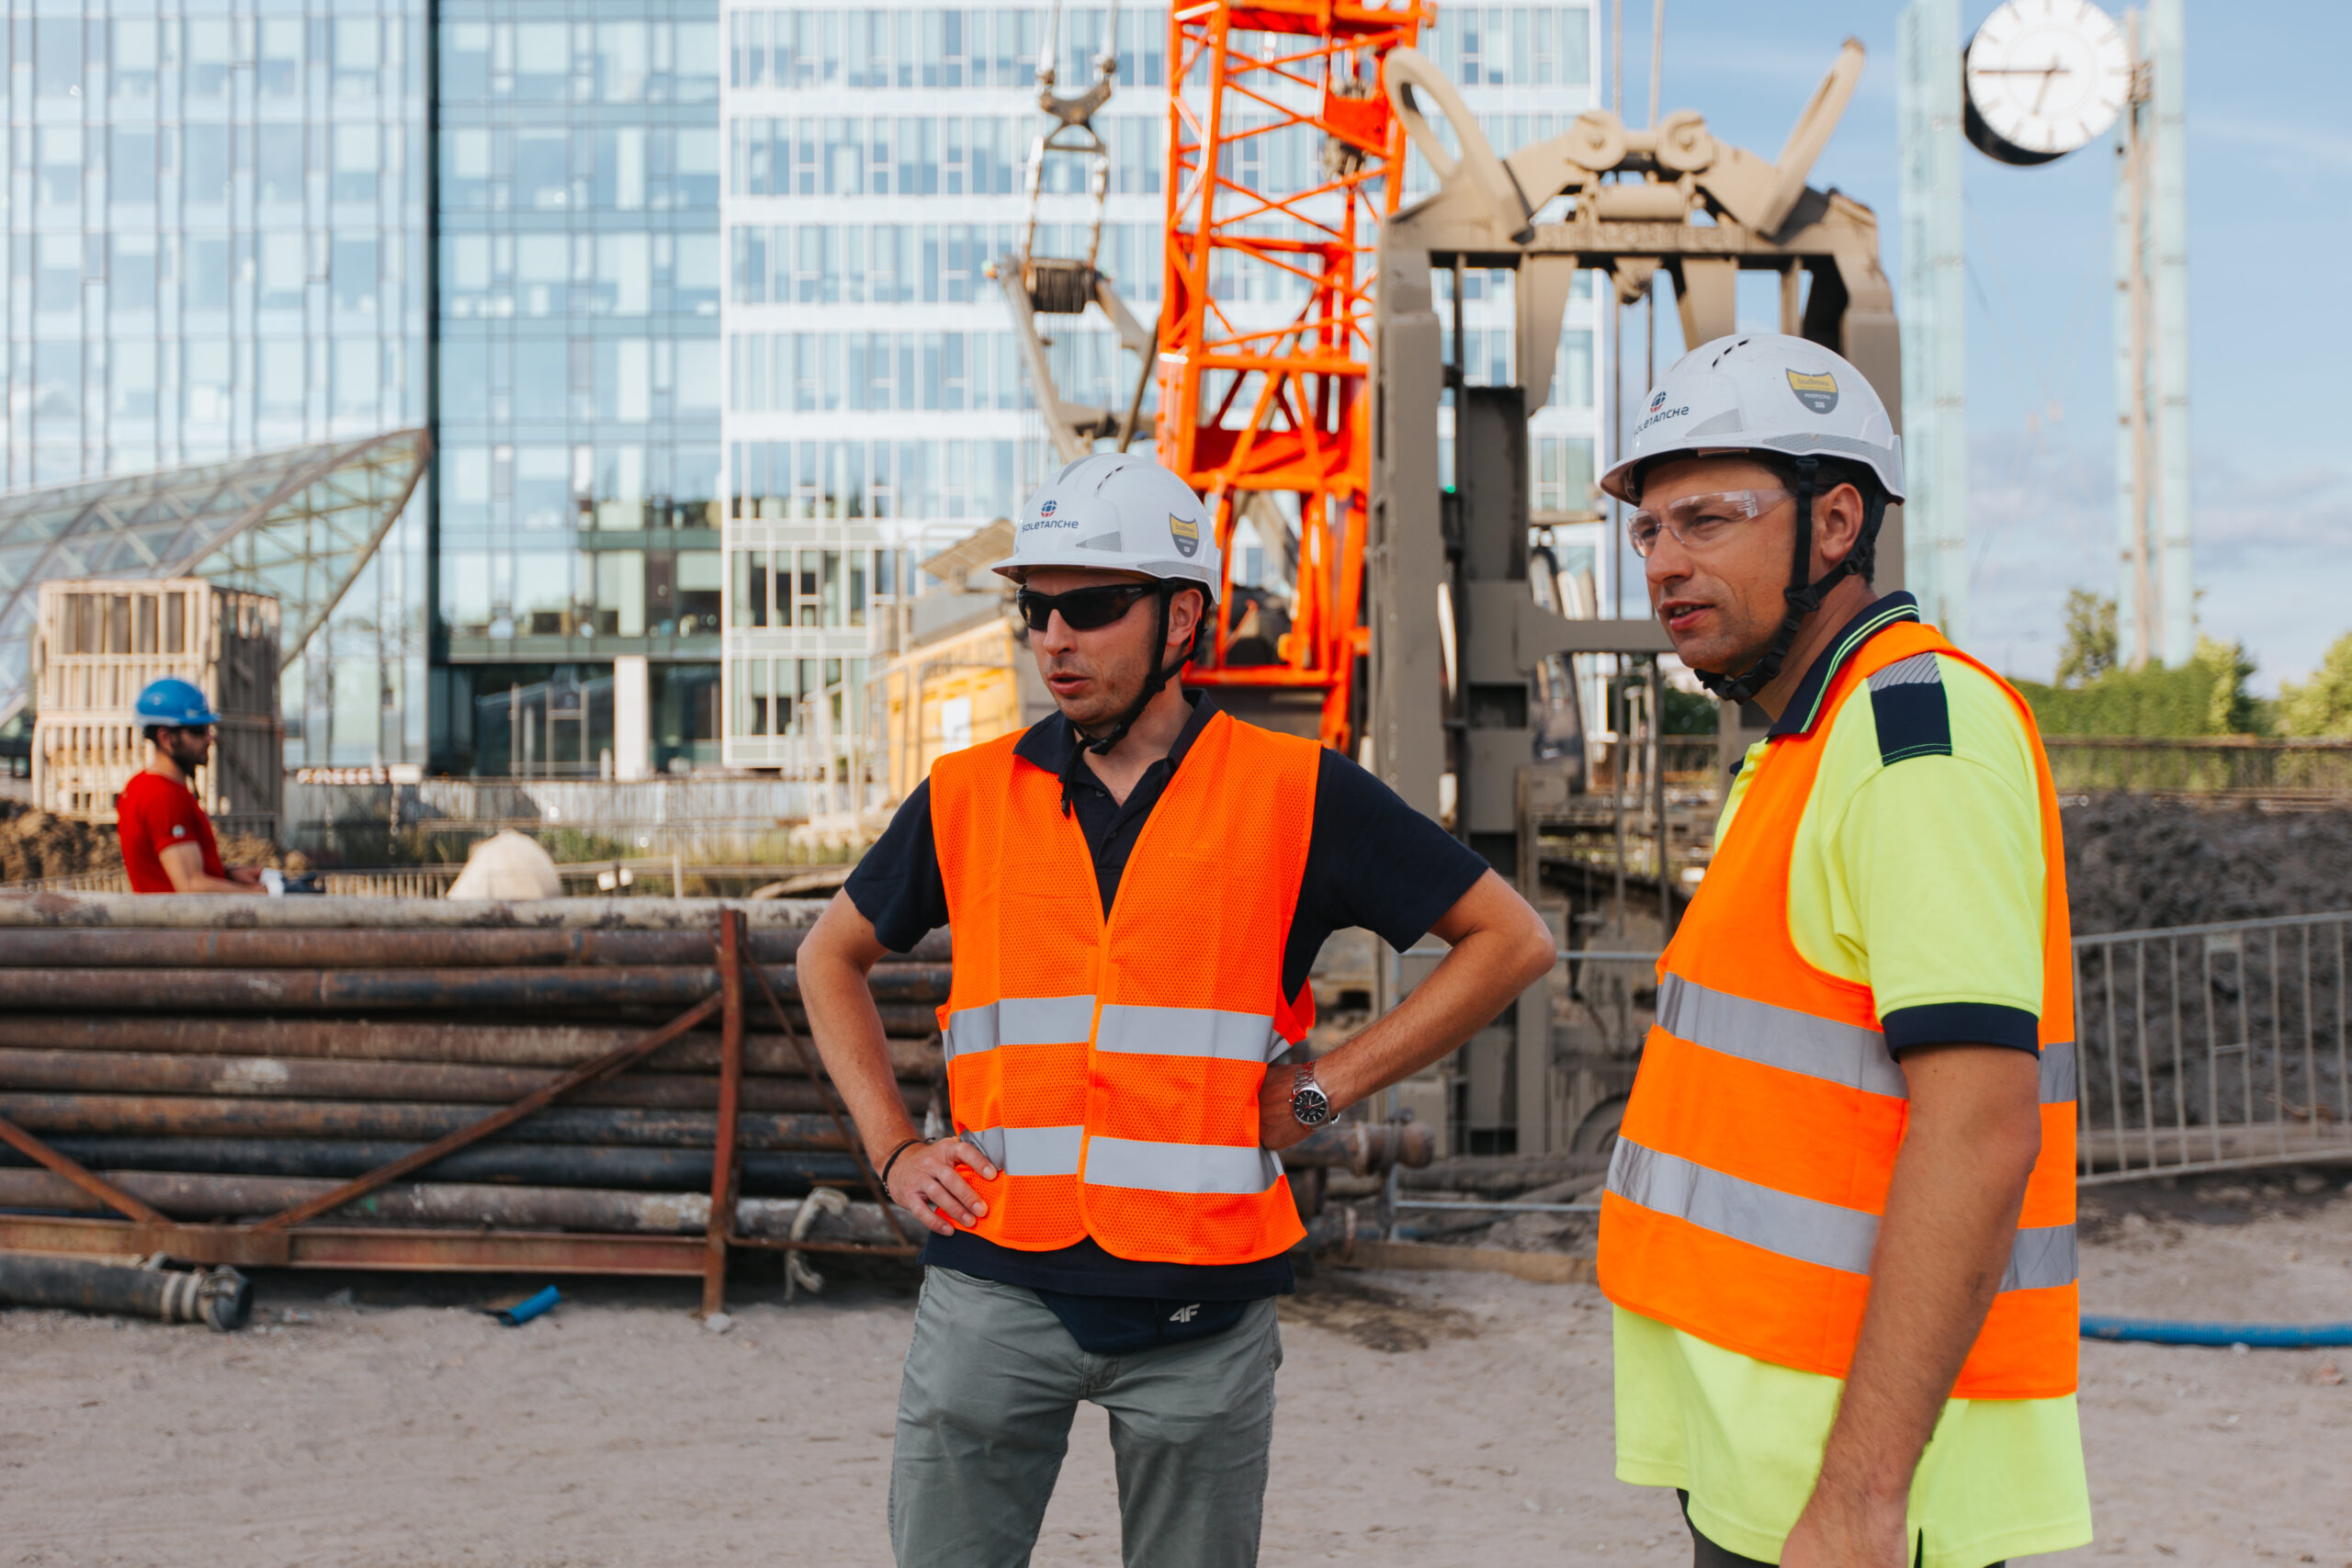 From left: Marek Wasiluk, Project Manager on behalf of Soletanche Polska, and Łukasz Pluta, Works Manager supervising the execution of the diaphragm wall scope - Reconstruction of Warsaw’s West Station.